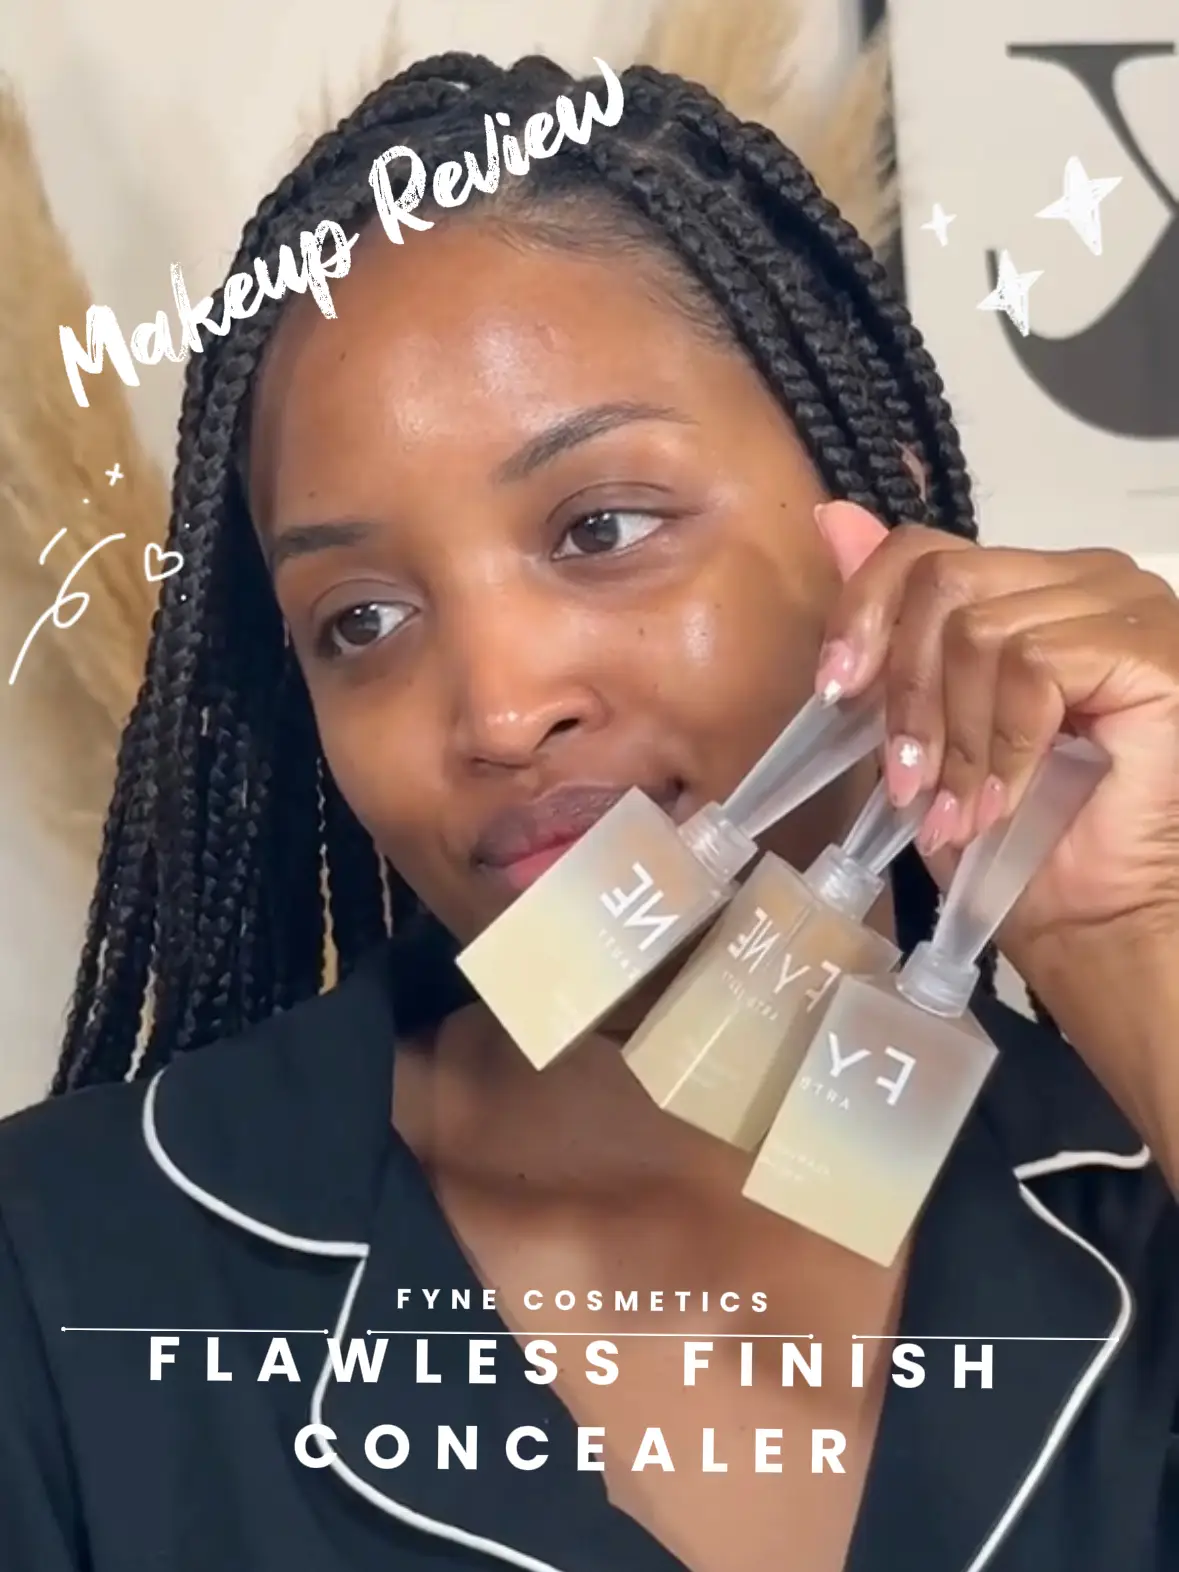 New FYNE Cosmetics Flawless Finish Concealer ✨, Gallery posted by Flavia  Jacintho